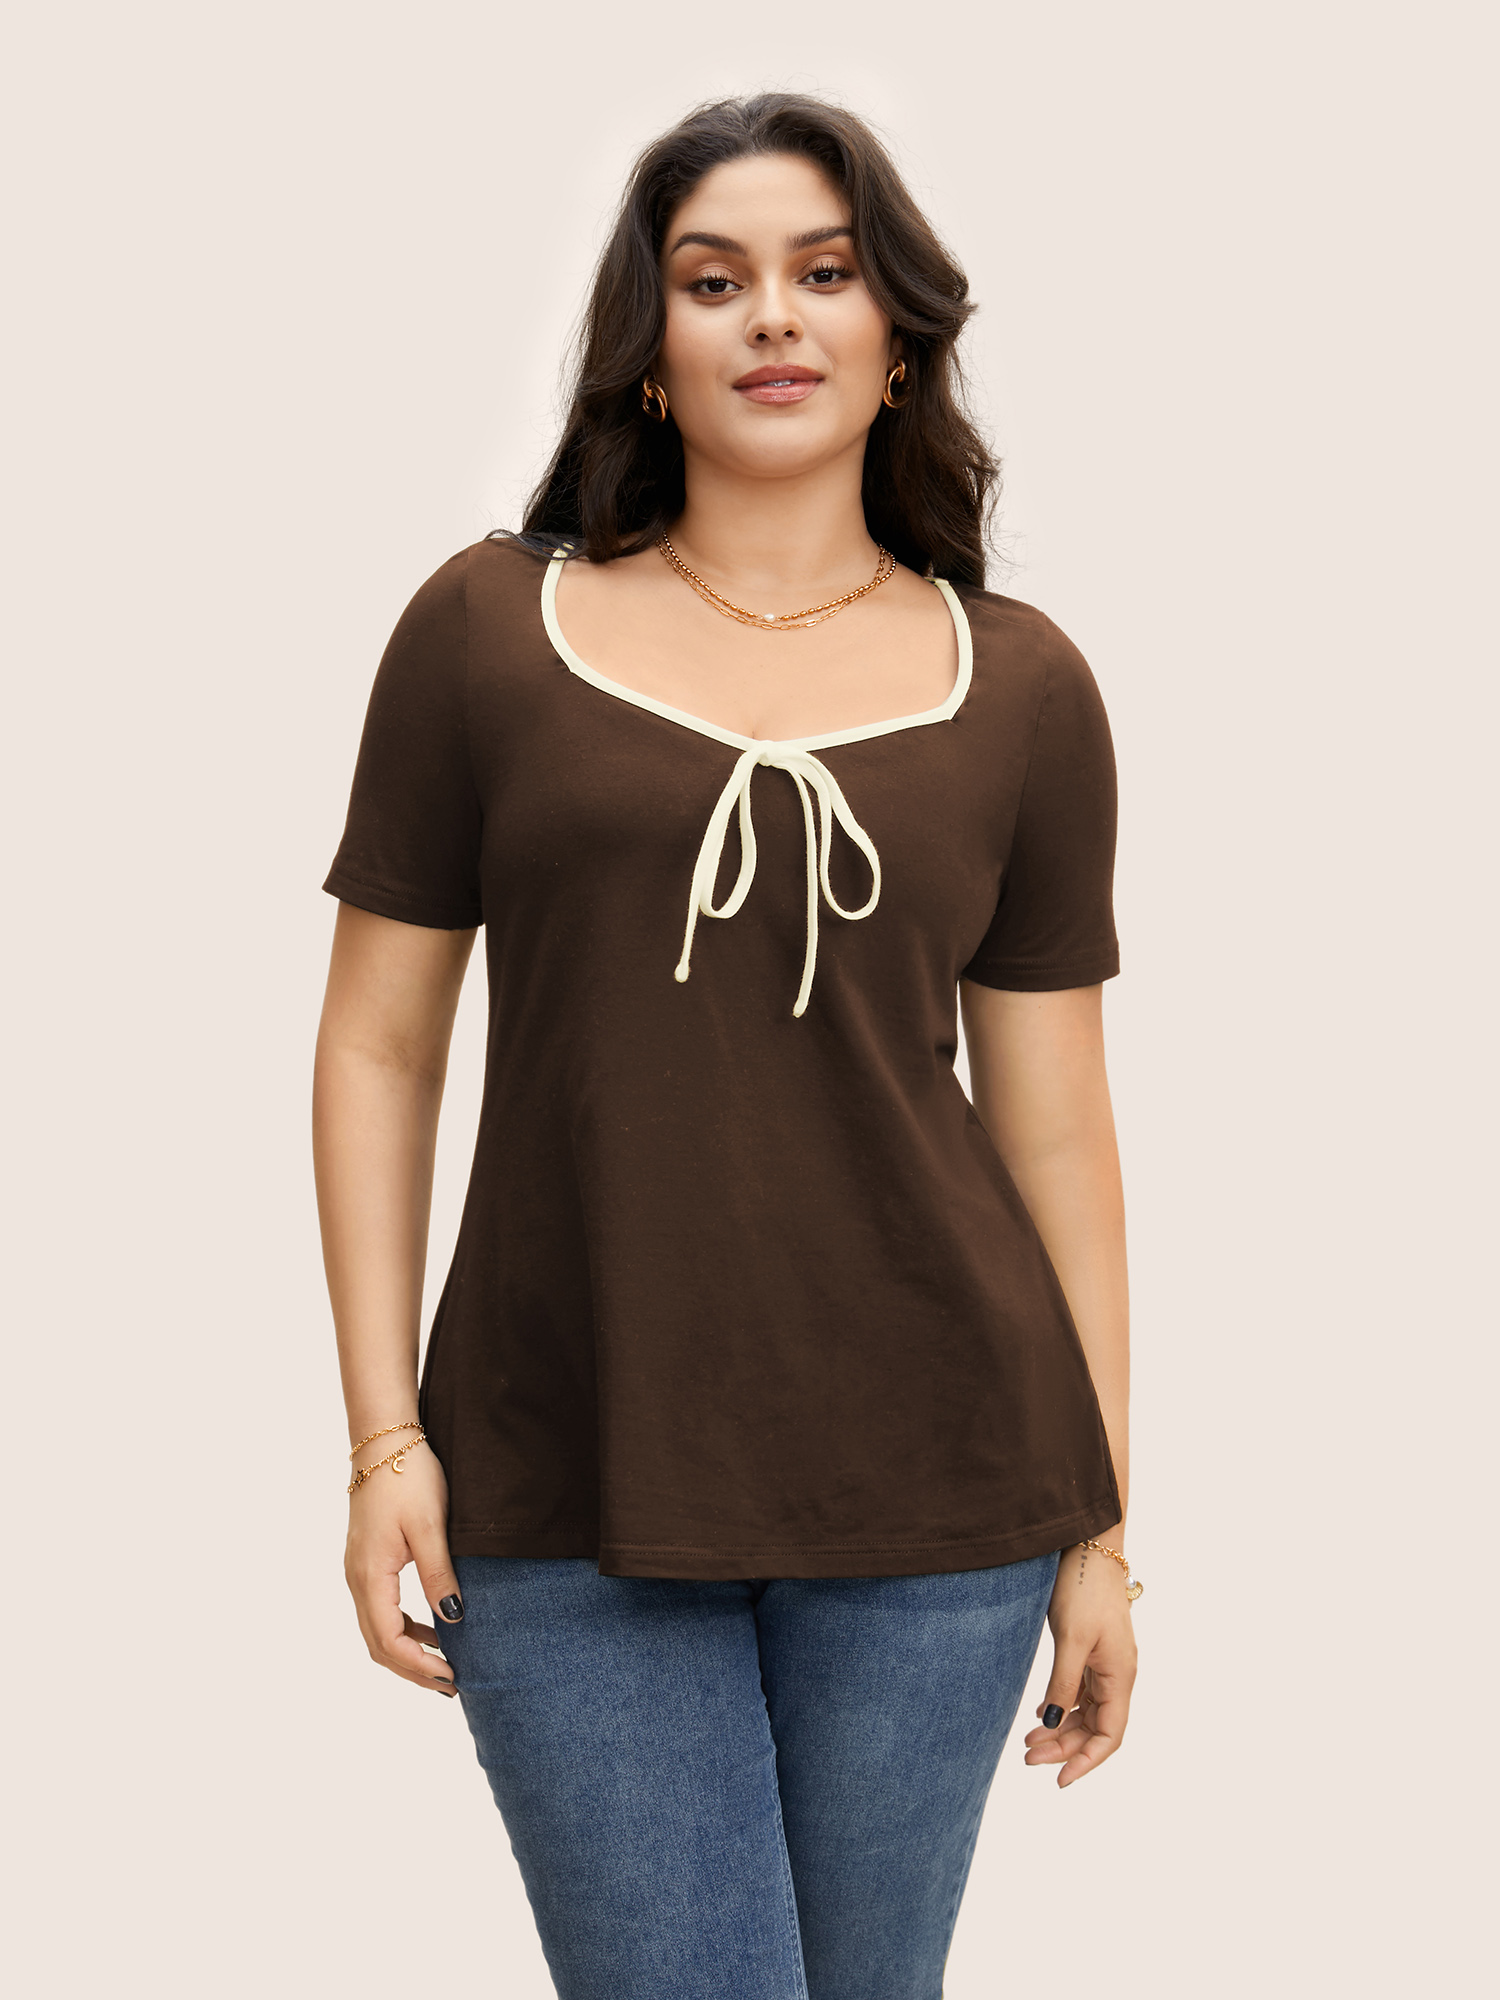 

Plus Size Square Neck Contrast Trim Tie Knot T-shirt DarkBrown Women Elegant Tie knot Square Neck Bodycon Everyday T-shirts BloomChic